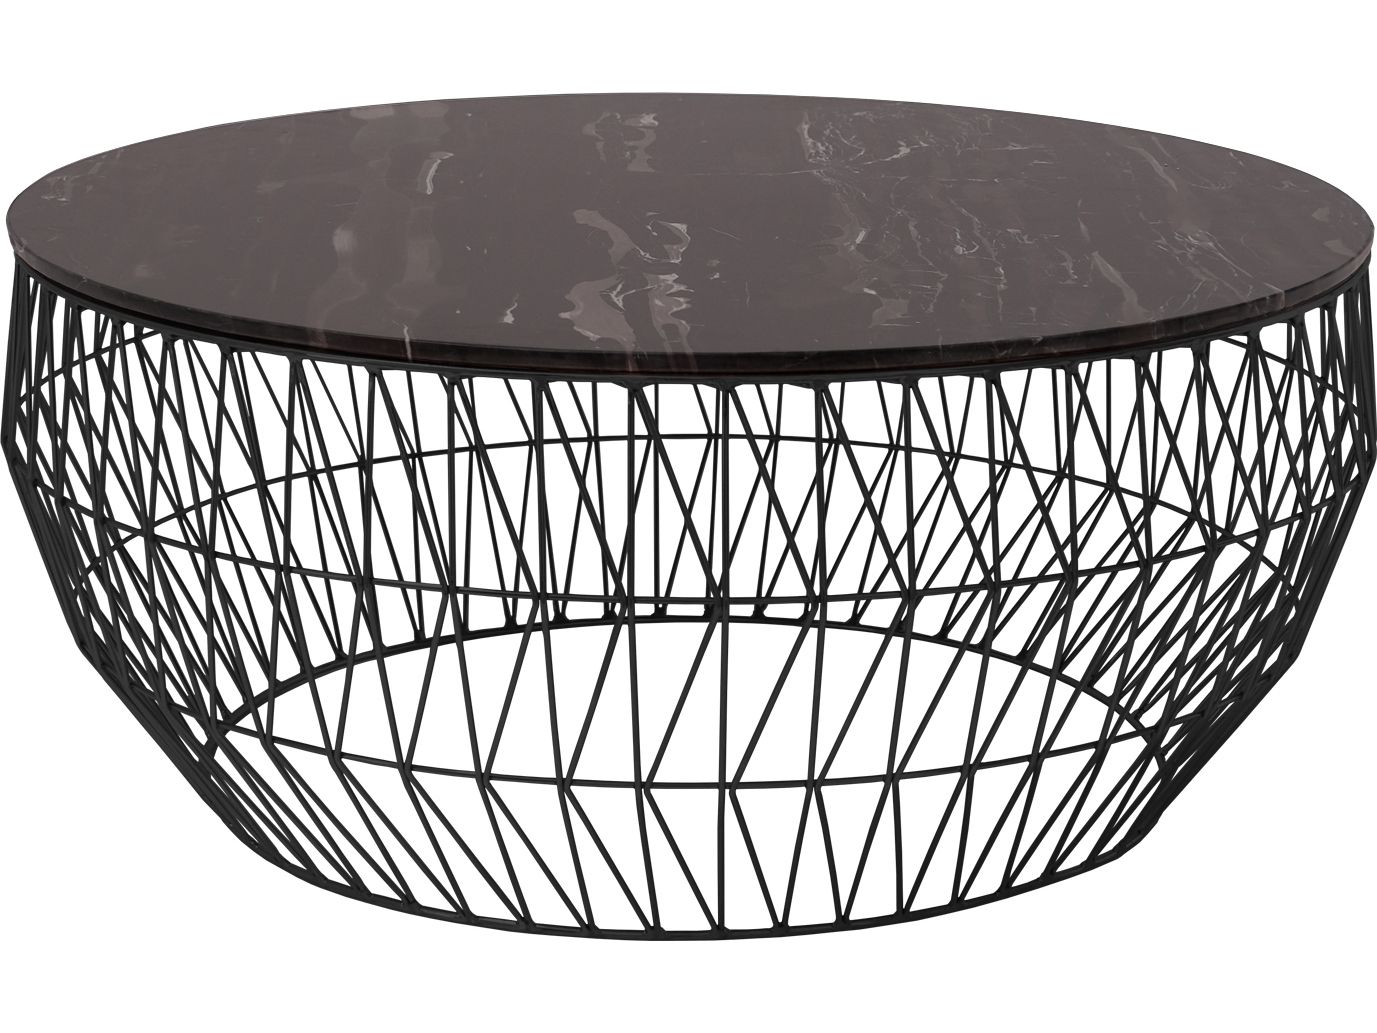 Black Outdoor Coffee Table Uk : Portside Outdoor Round Concrete Coffee Pertaining To Outdoor Half Round Coffee Tables (Gallery 10 of 20)